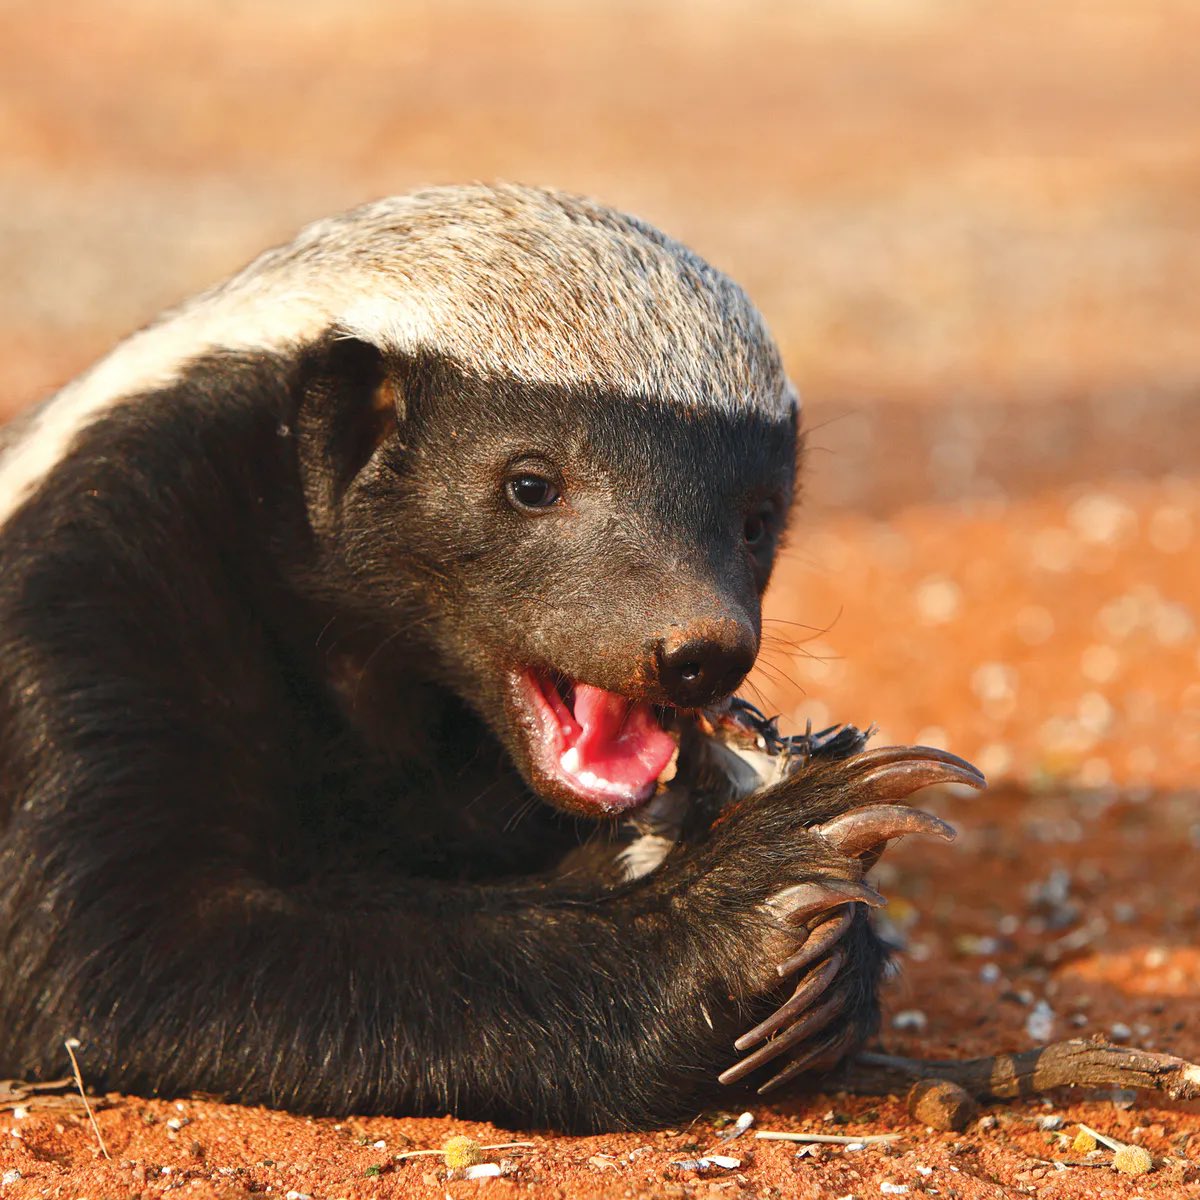 The honey badger is the most fearless animal alive in the Guinness Book of World Records. These smart crazies attack large prey by removing their testicles & wait for them to bleed out.They’re also immune to many venoms - they get bit by king cobras and simply sleep it off.